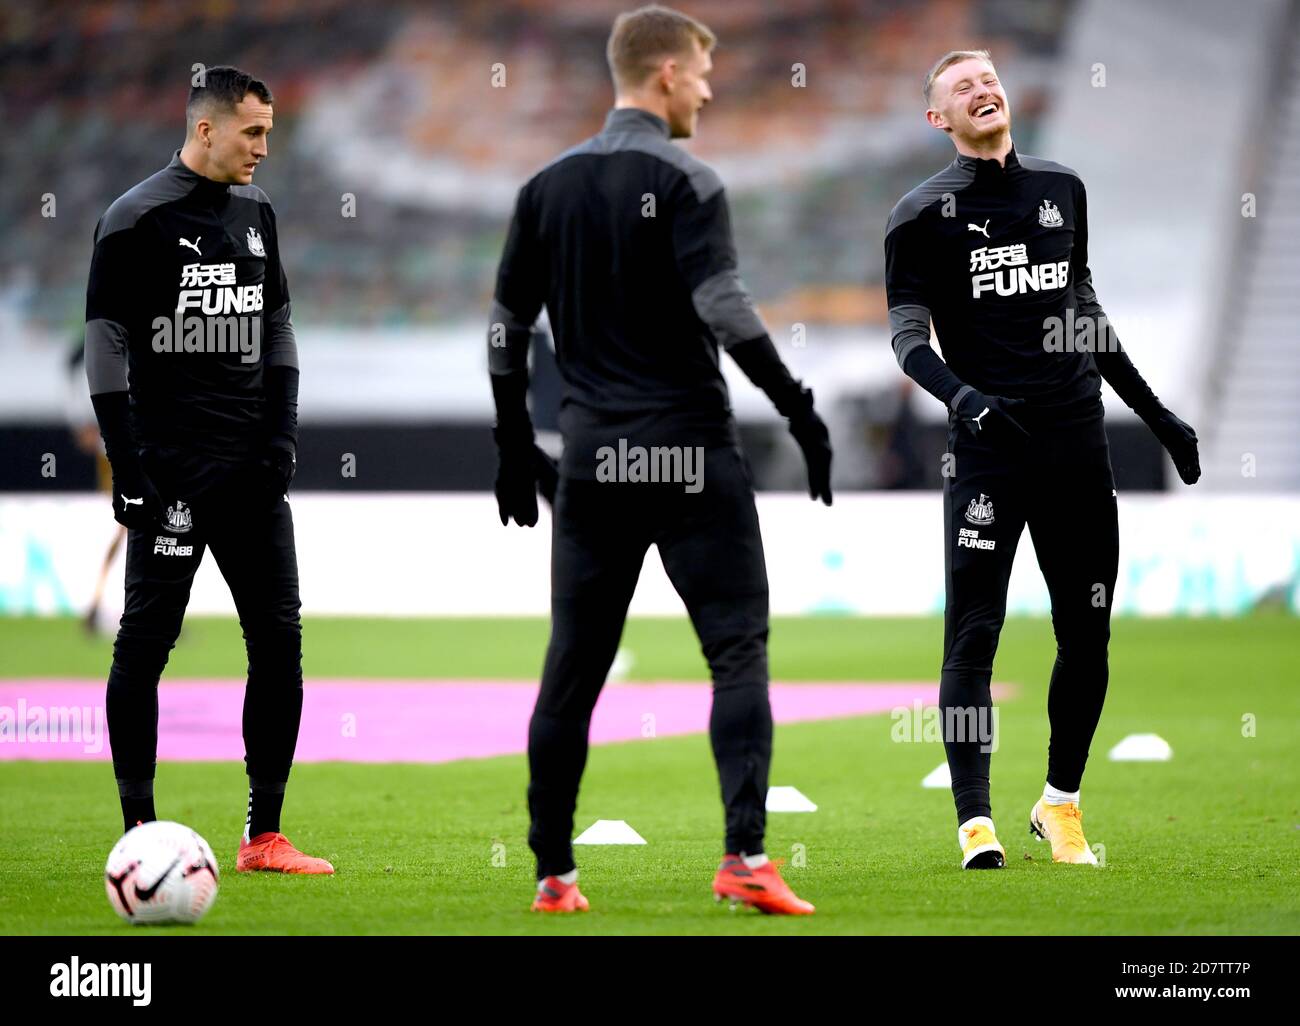 Newcastle United's Sean Longstaff (right) shares a joke with teammates as they warm up prior to the beginning of the Premier League match at Molineux, Wolverhampton. Stock Photo